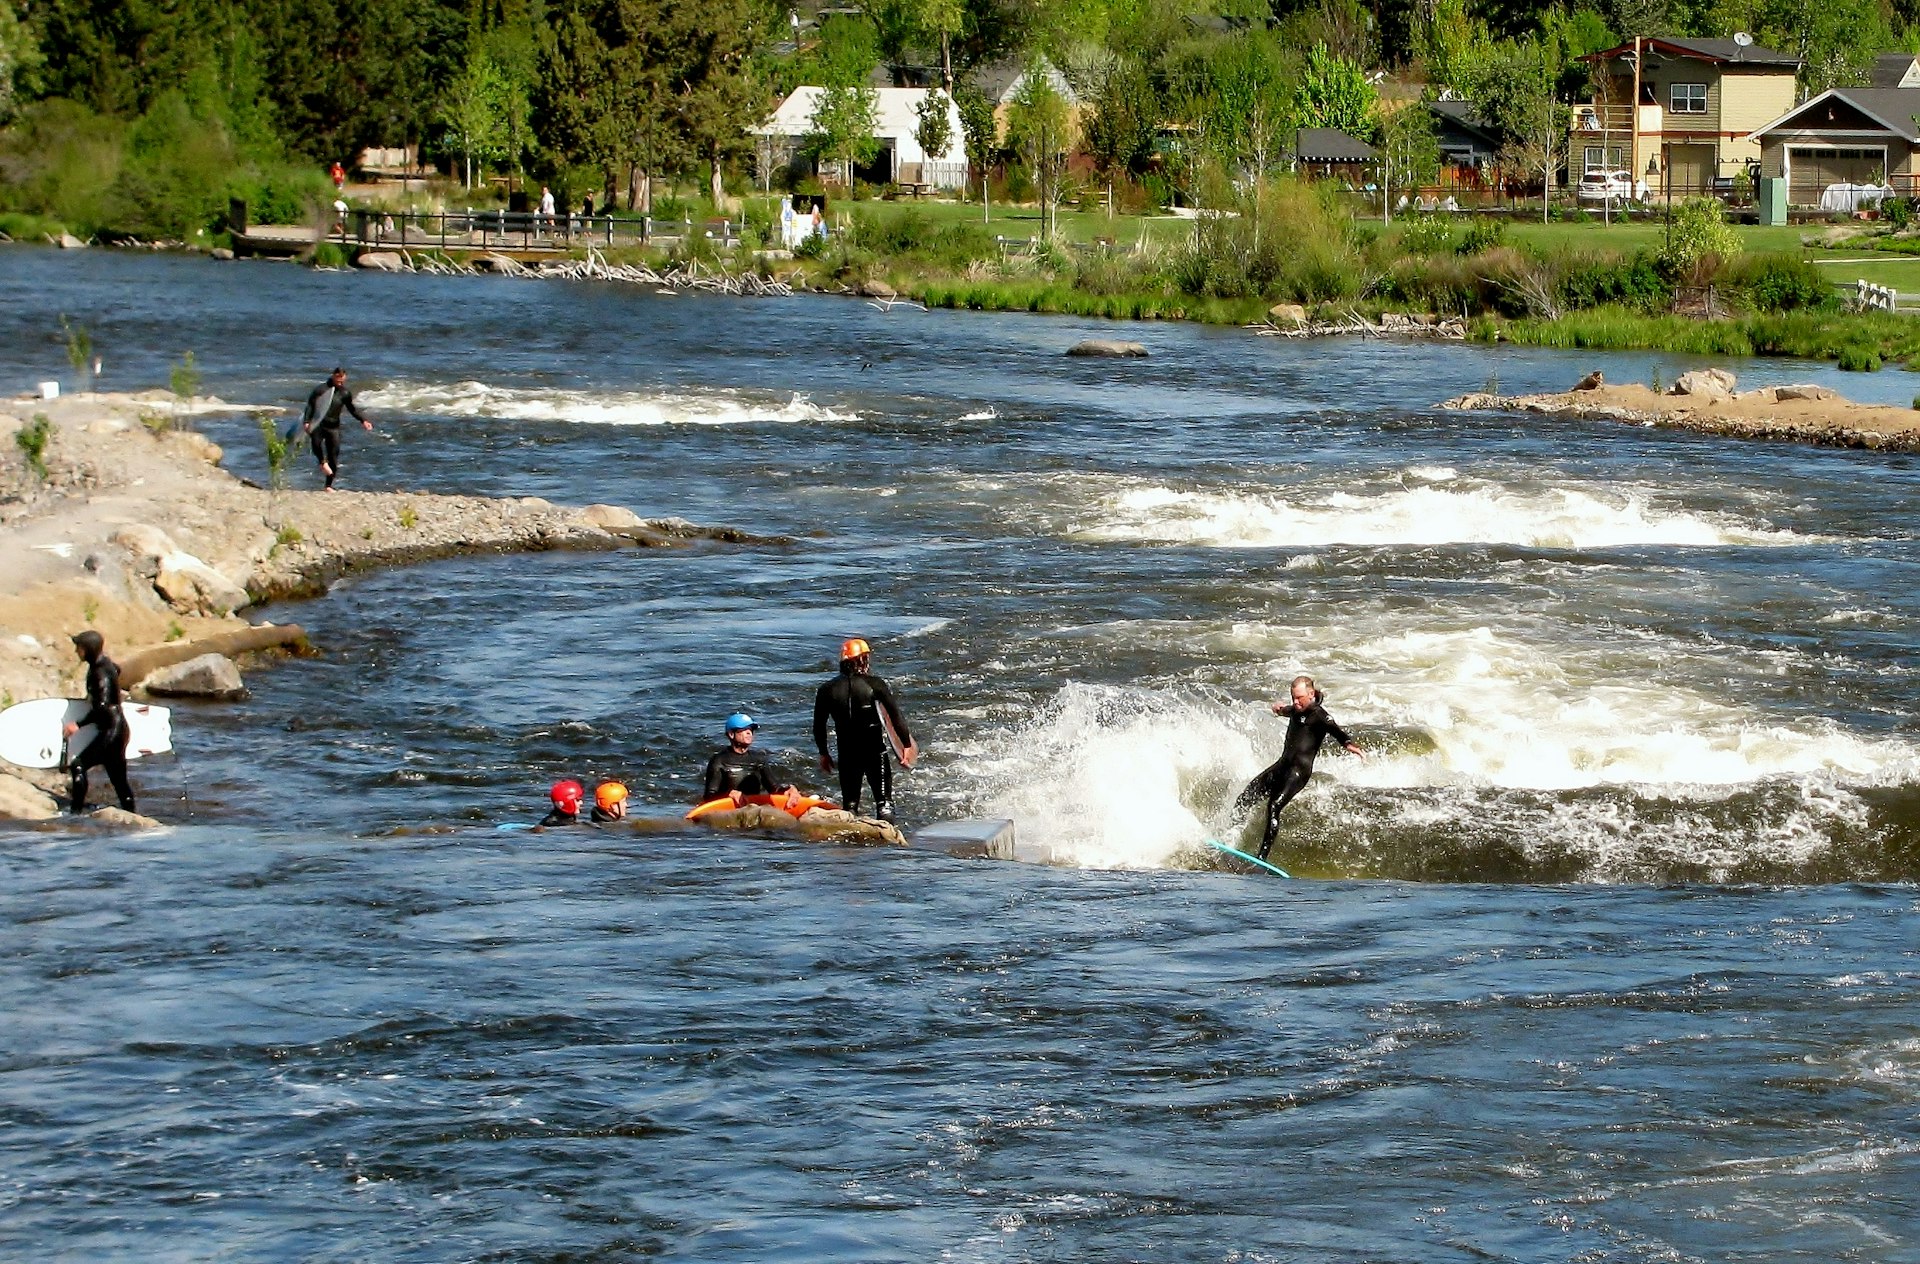  Group of people river surfing in the whitewater park at Deschutes River.